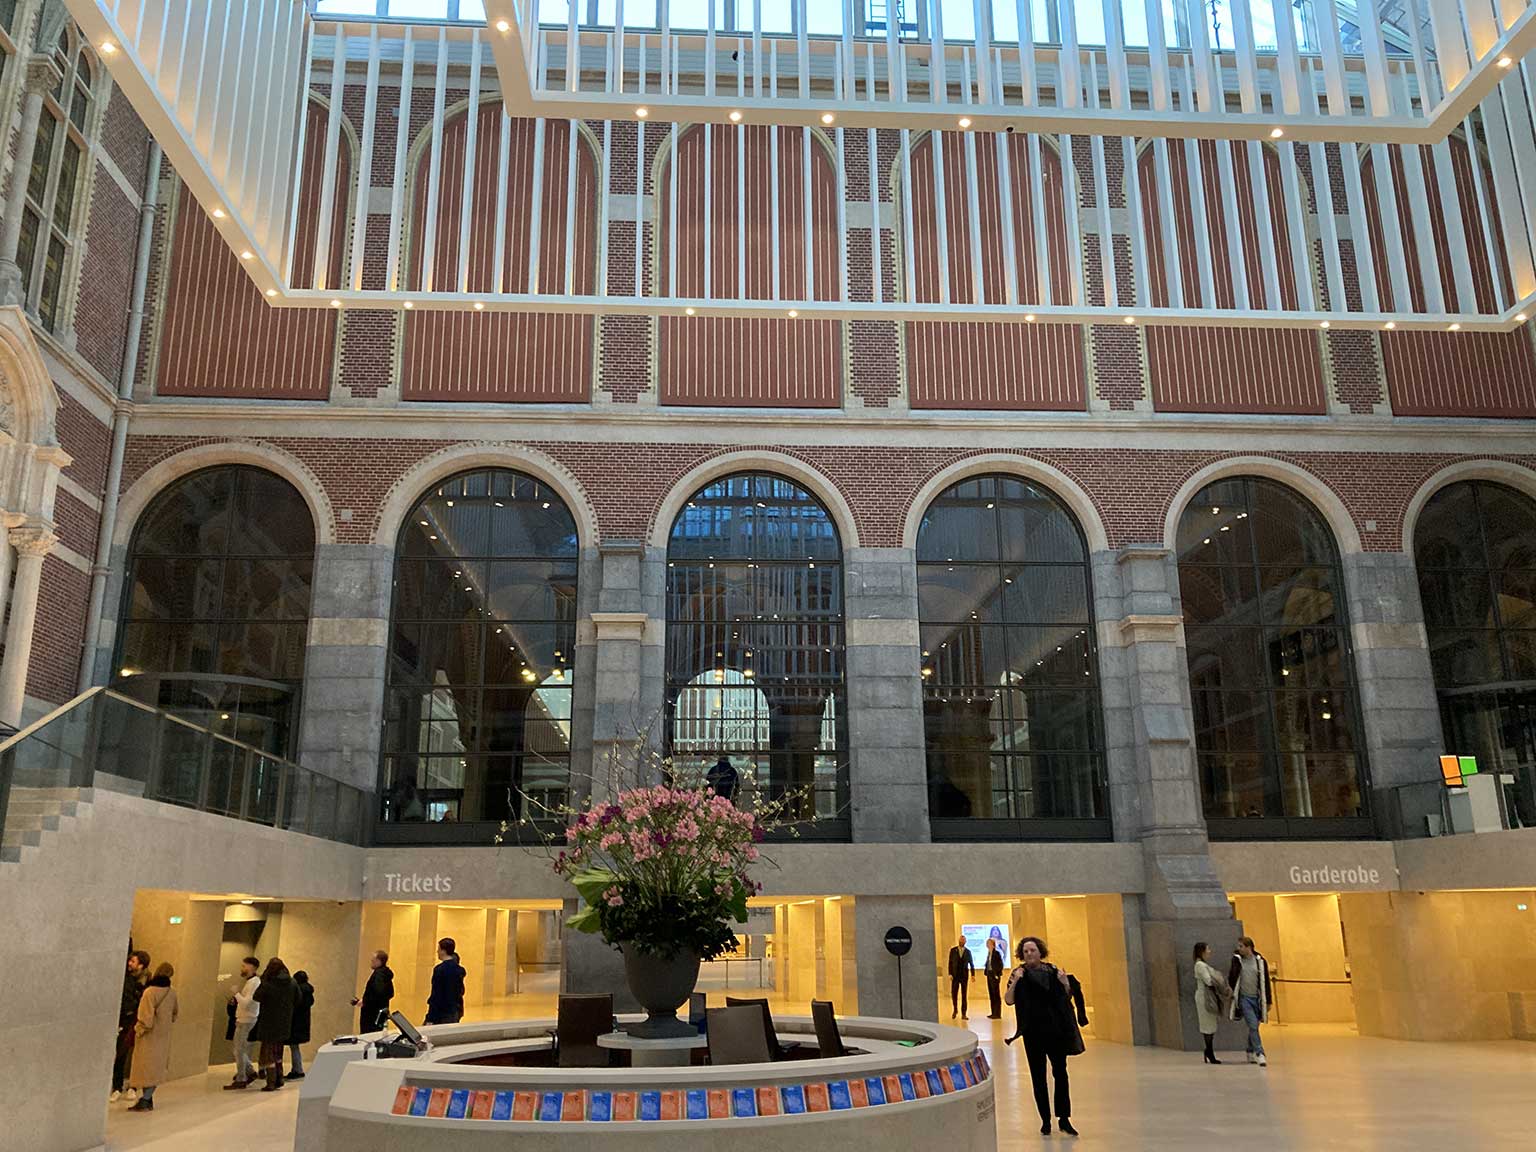 Atrium, Rijksmuseum, Amsterdam, with entrance and glass wall with view of the passage